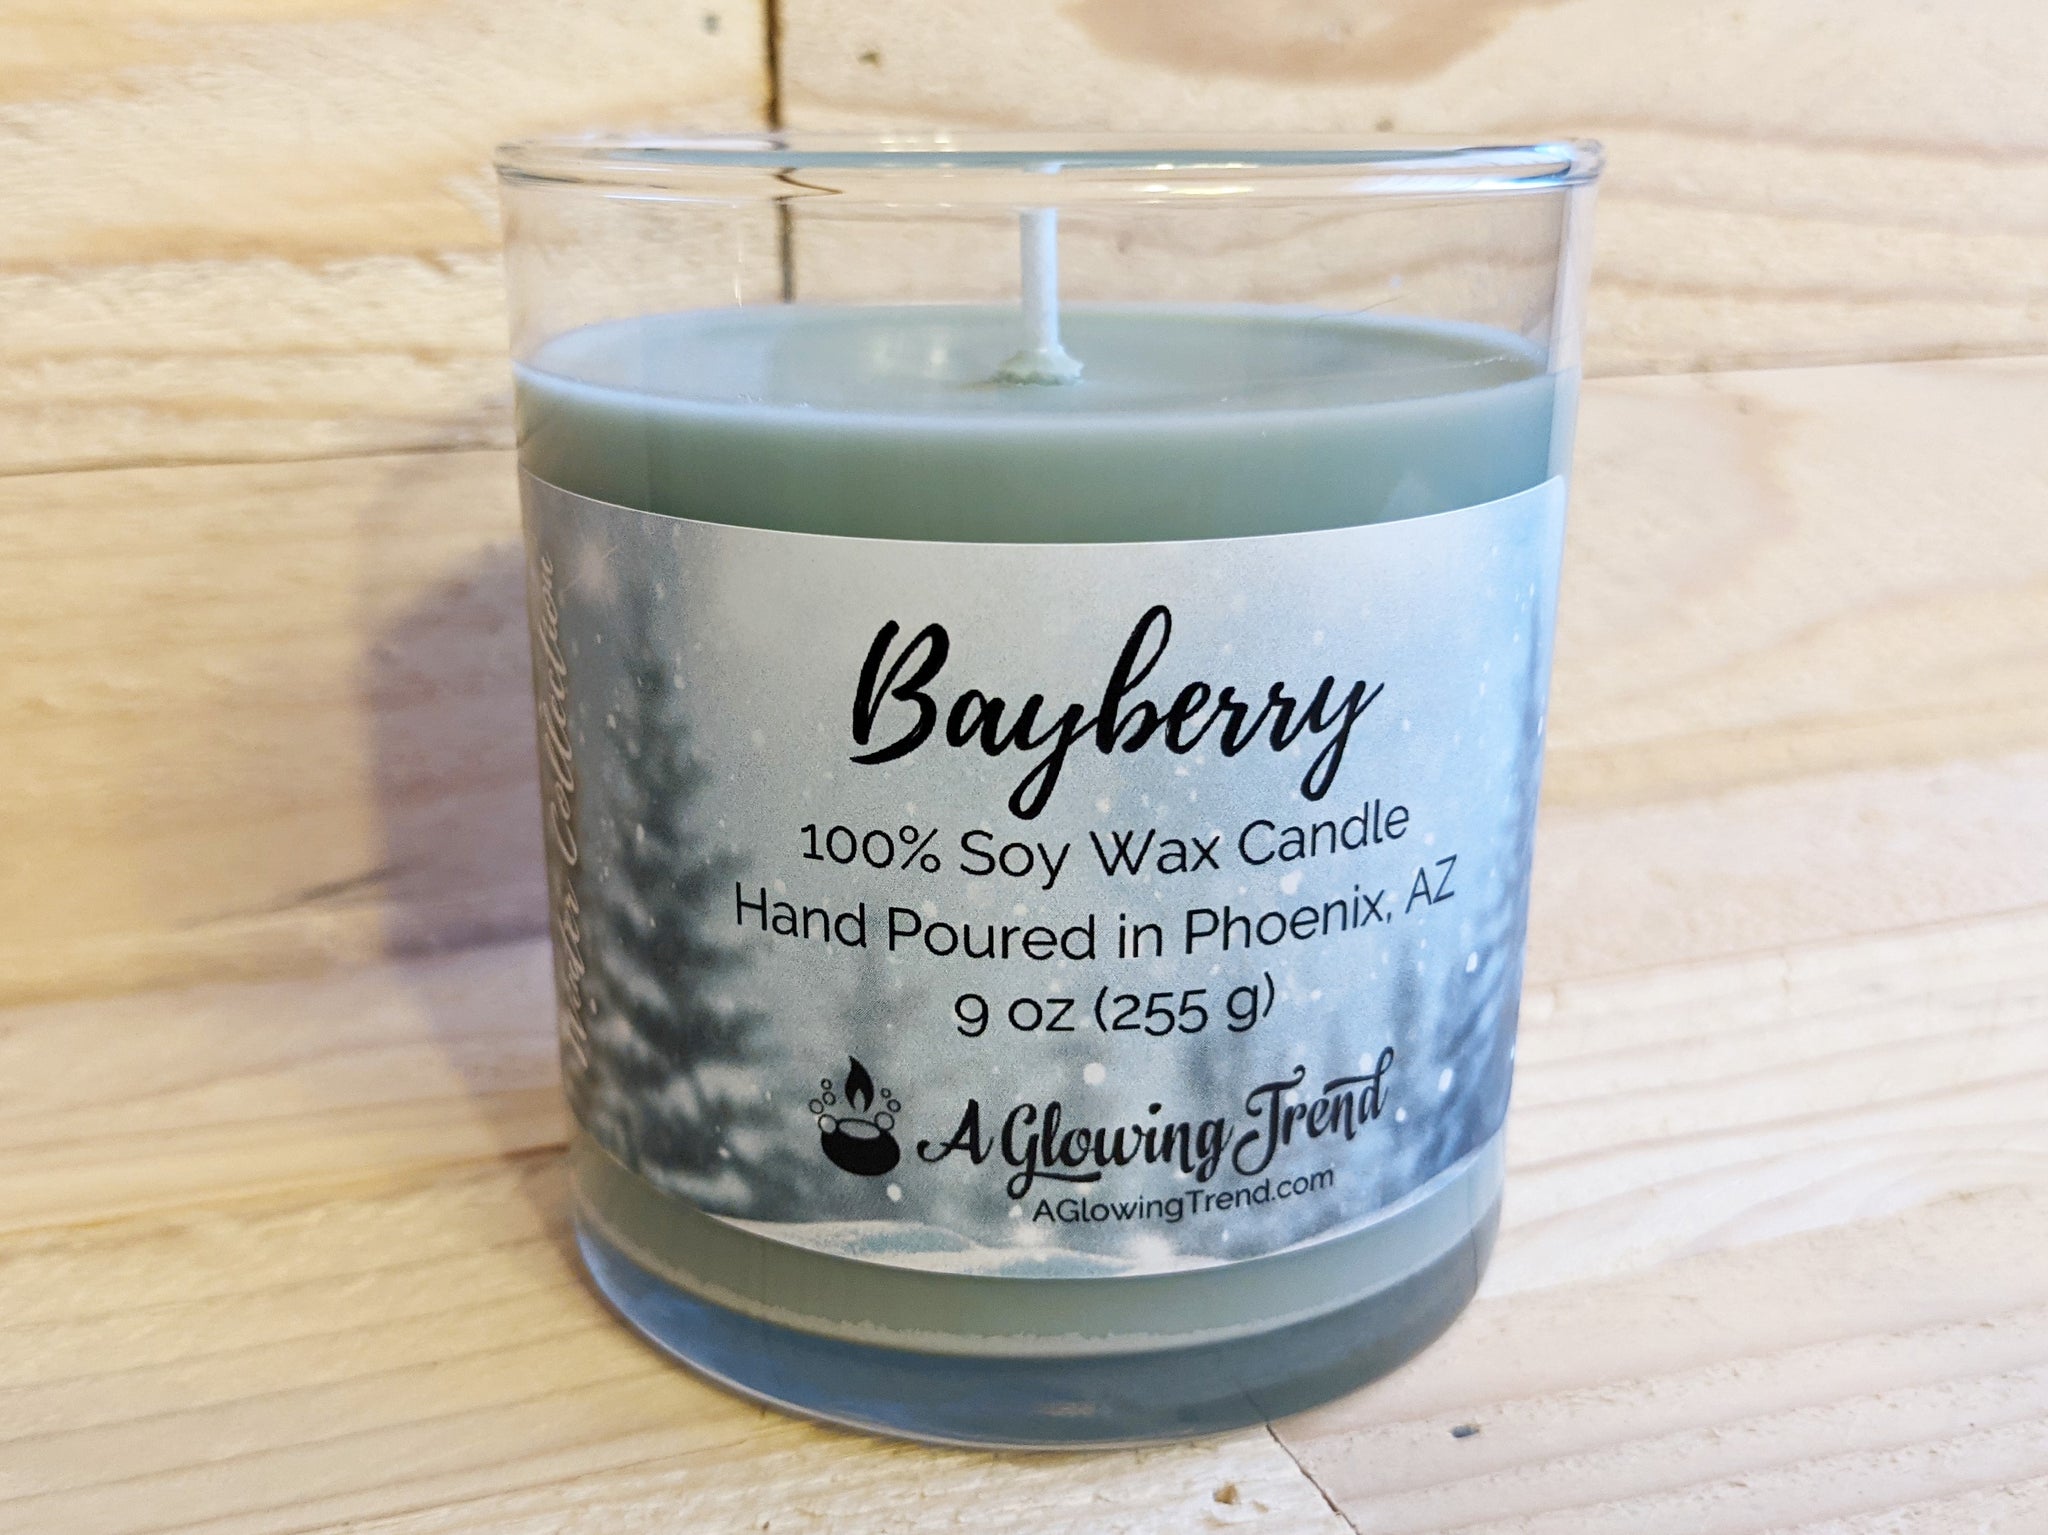 A 9 oz glass tumbler containing a green Bayberrry scented soy candle by A Glowing Trend